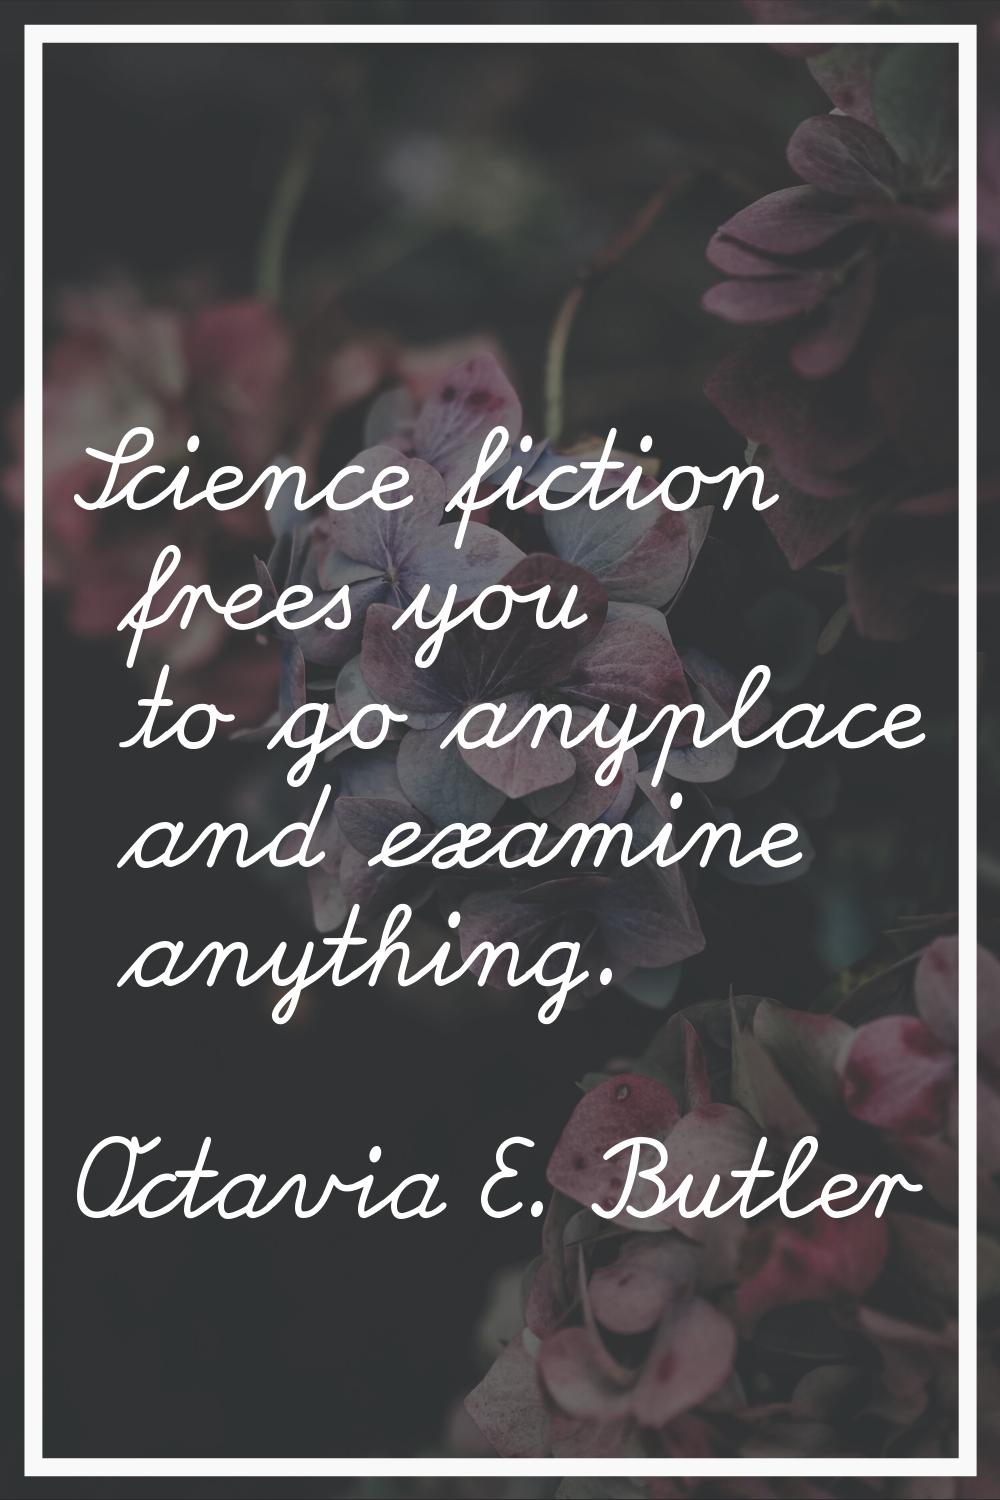 Science fiction frees you to go anyplace and examine anything.